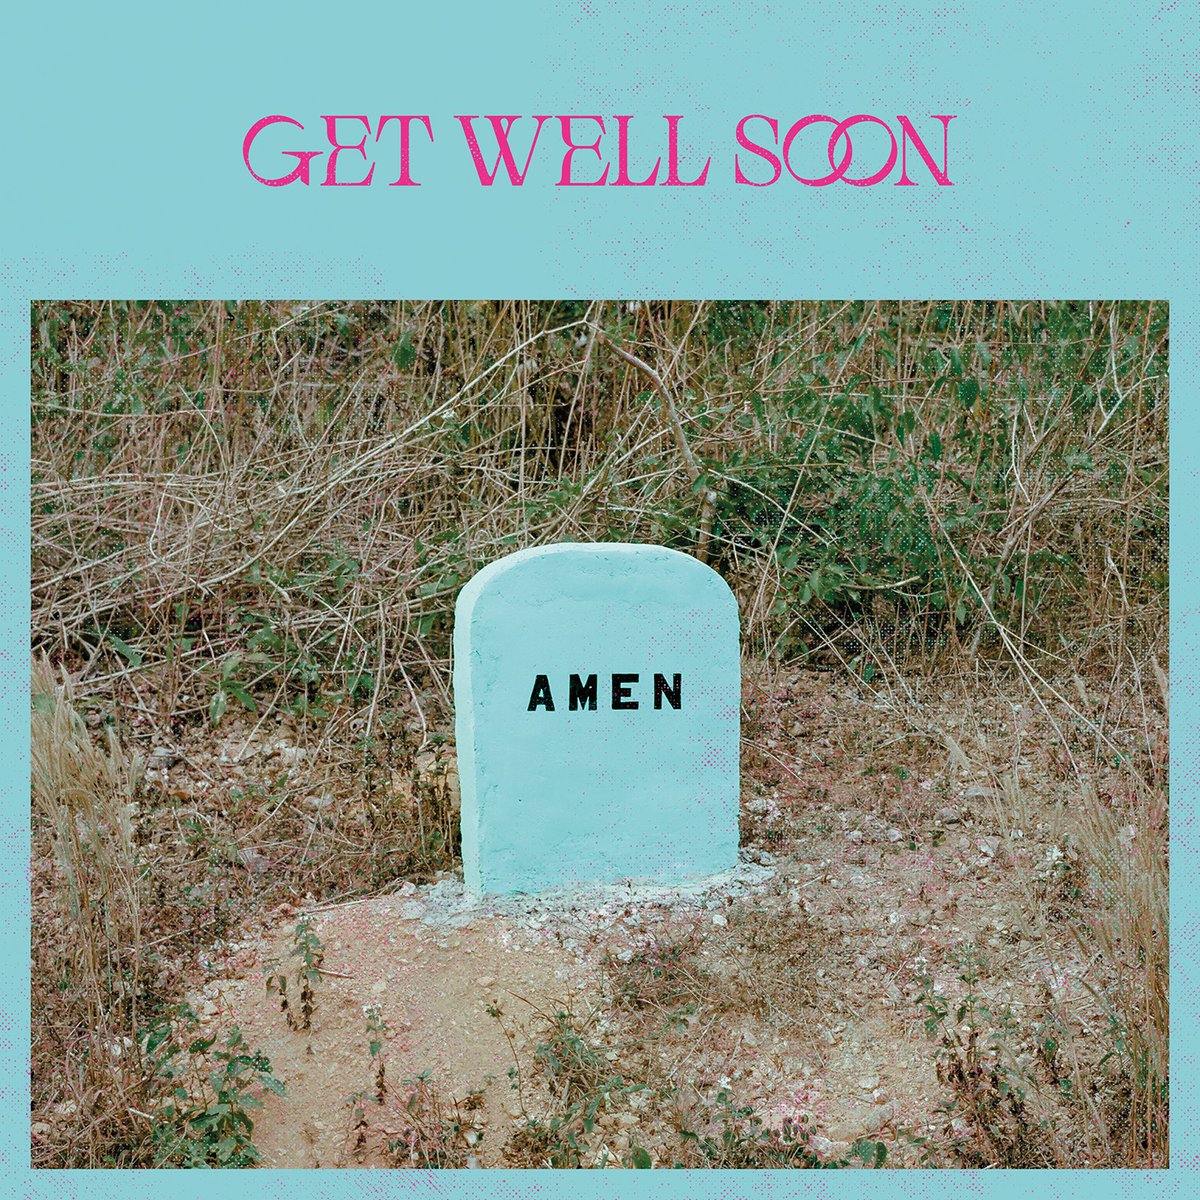 I’m very excited to announce my 6th Studio album called „AMEN“, well „GET WELL SOON, AMEN“ actually - I hope, finally this bandname found its purpose: this album is about things getting better! K